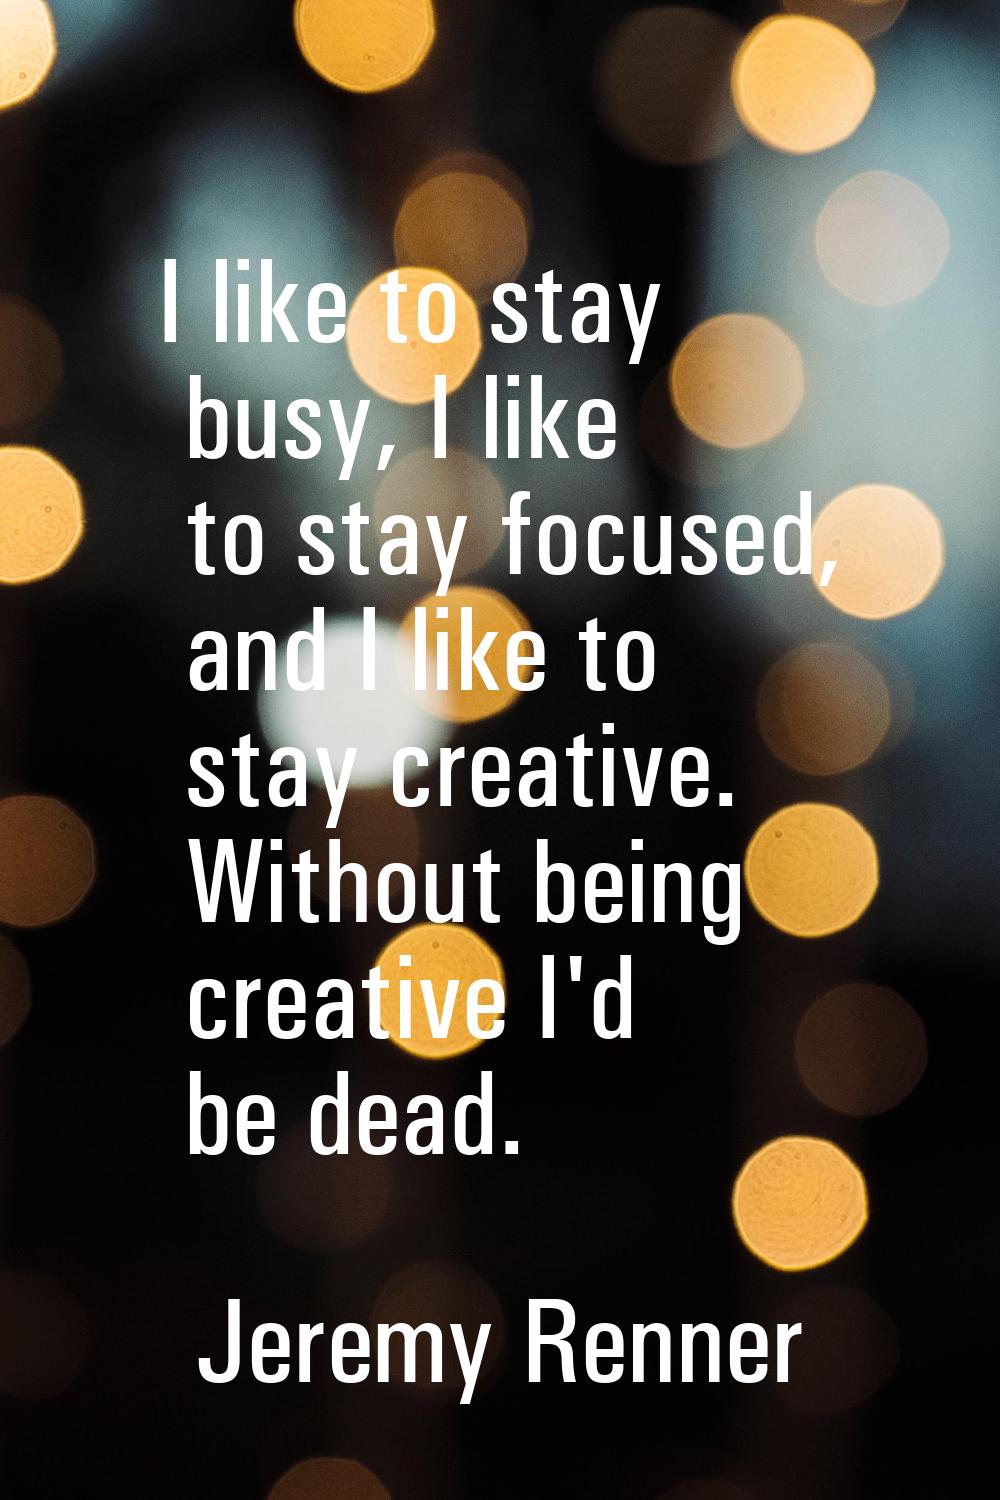 I like to stay busy, I like to stay focused, and I like to stay creative. Without being creative I'